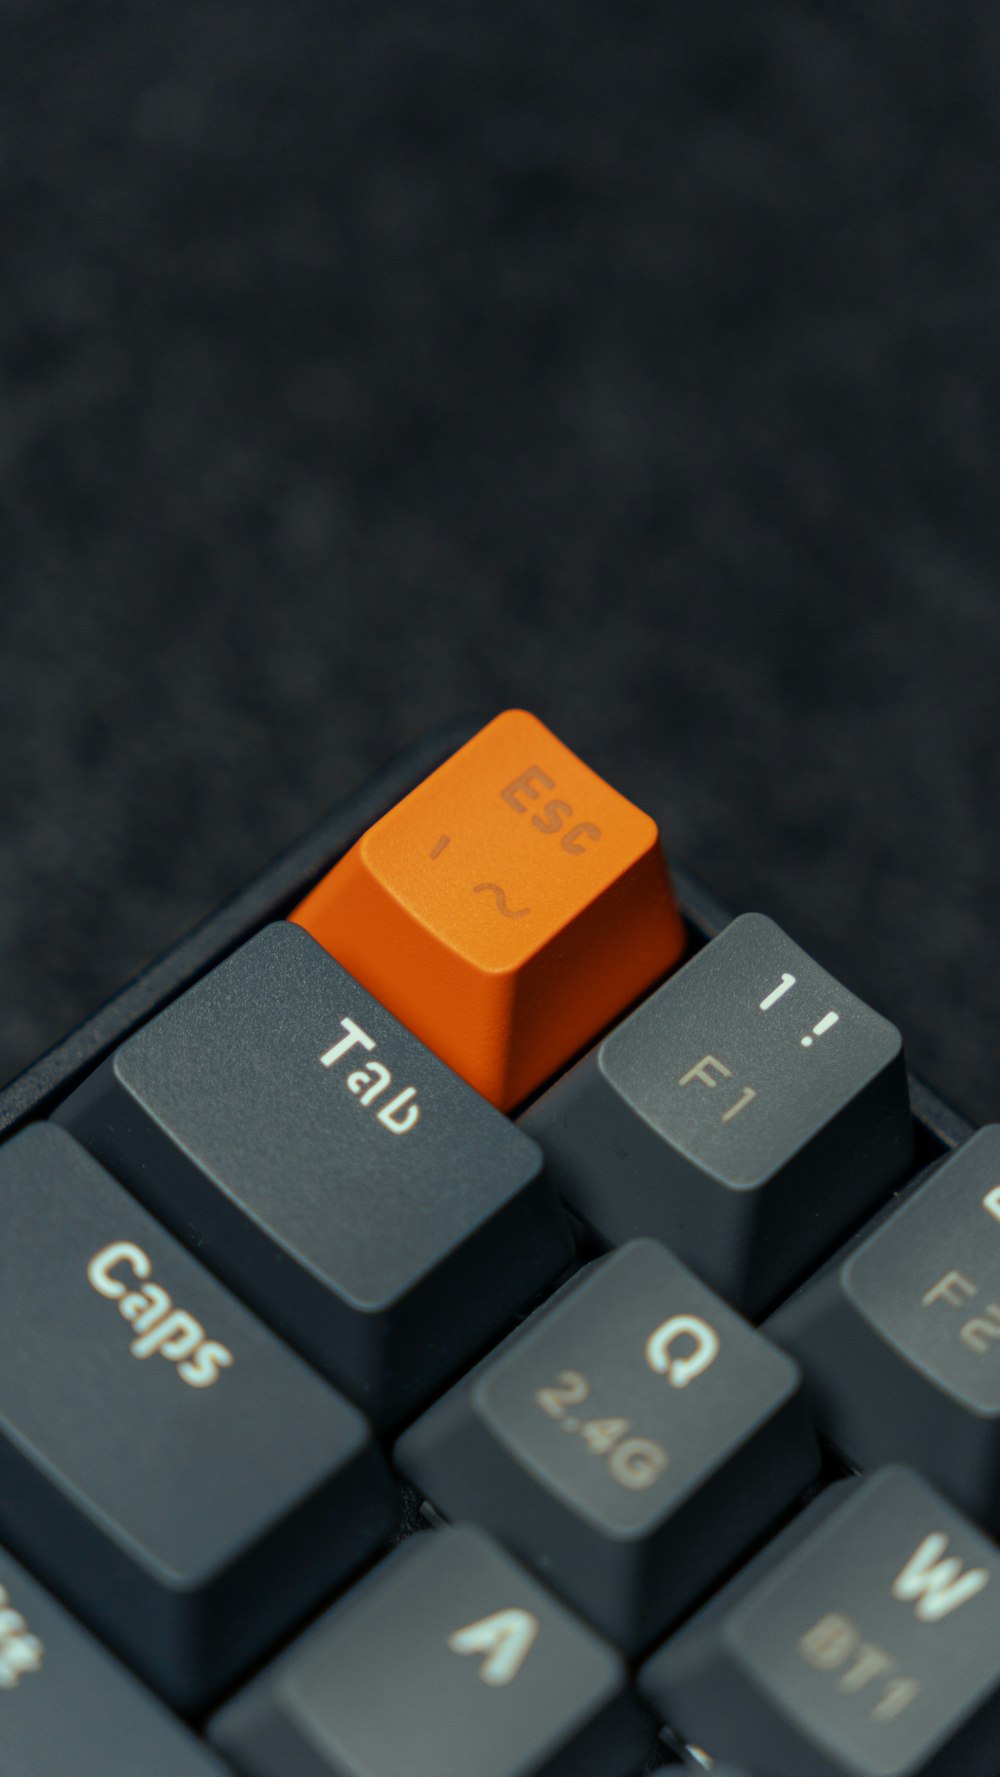 a close up of a computer keyboard with an orange key